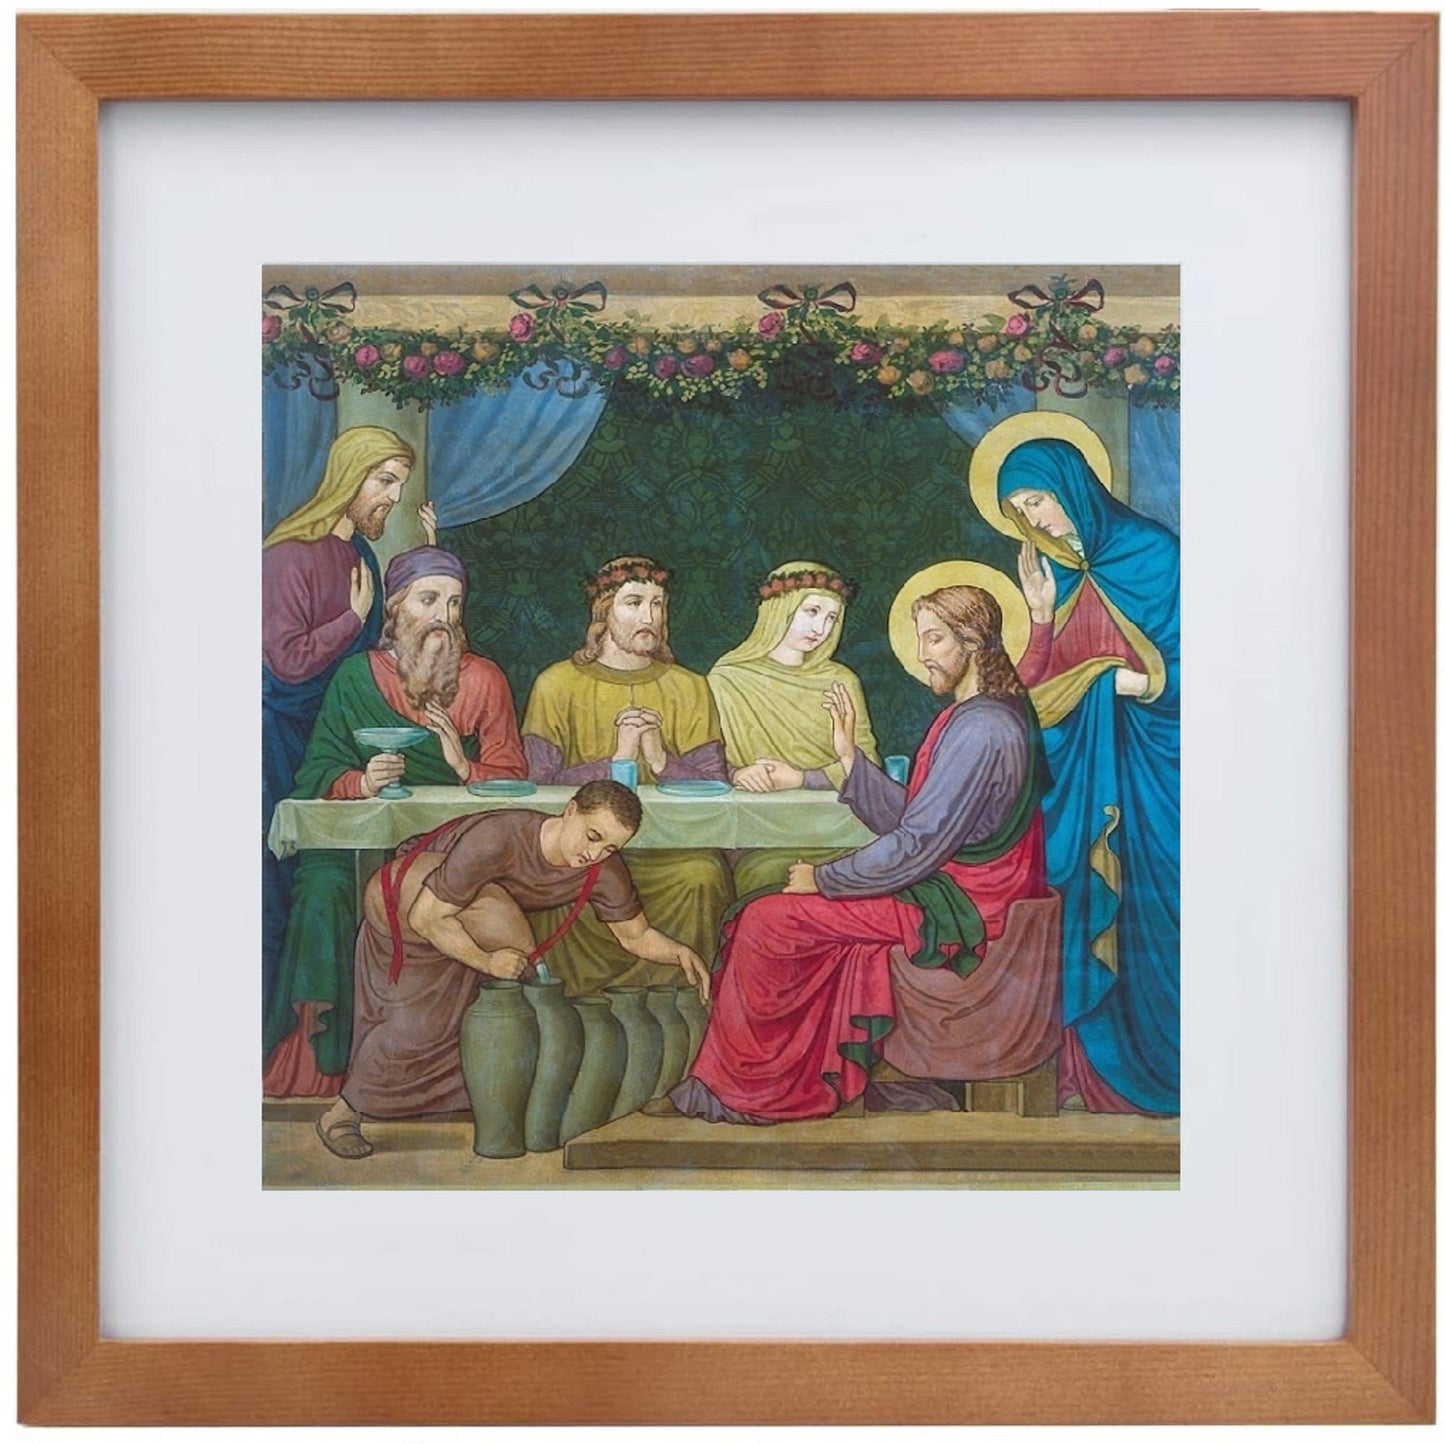 Wedding at Cana – Wedding Gift/Anniversary Gift – painted by Benedictine Monks– Catholic Art Print – Archival Quality